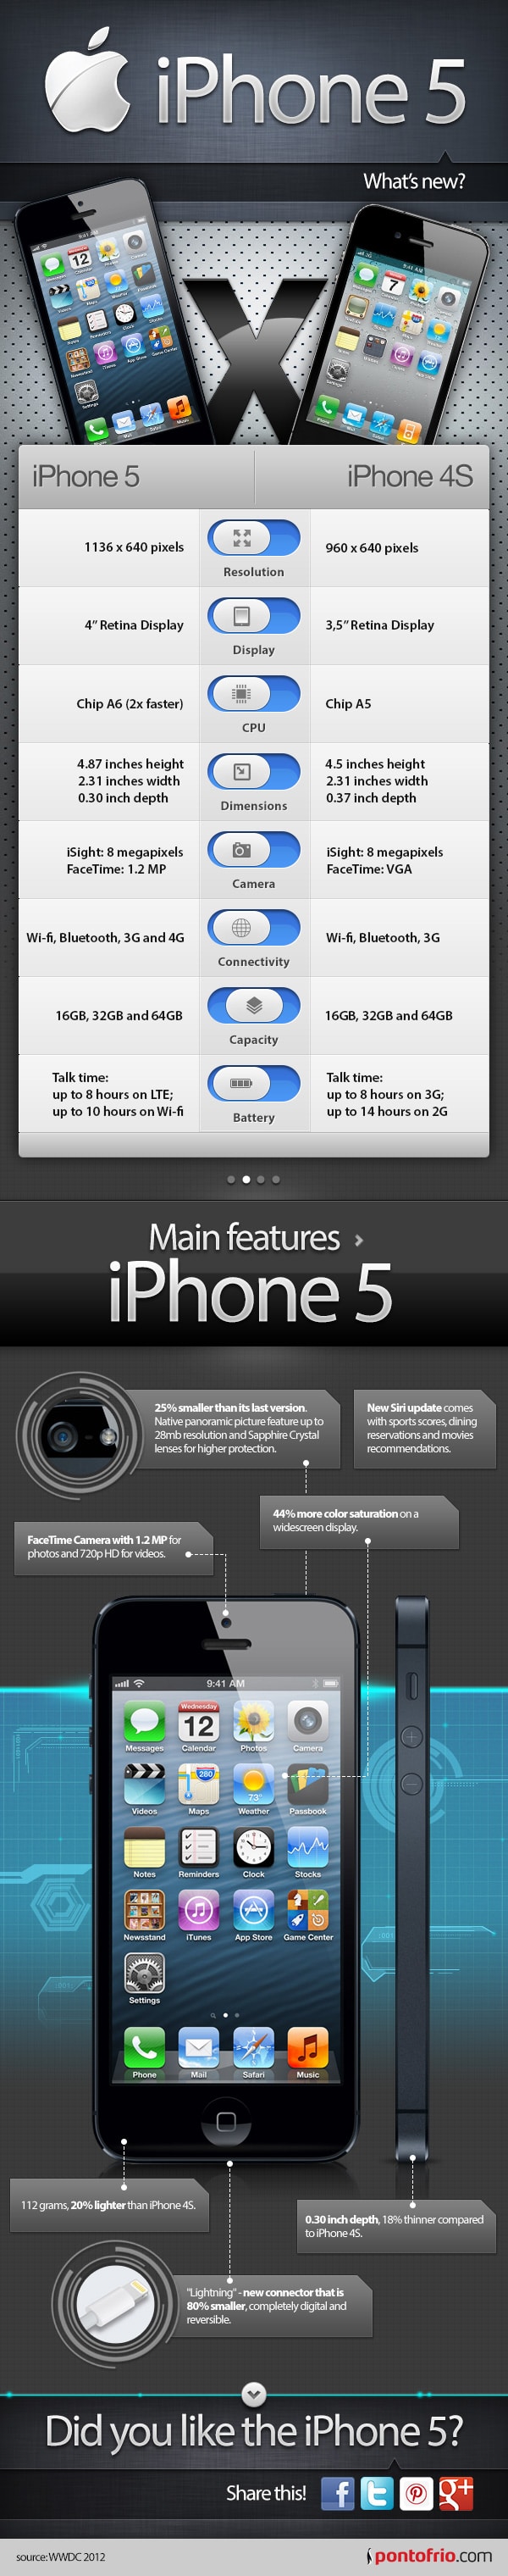 iPhone 5 Review: What’s Really New? [Infographic]